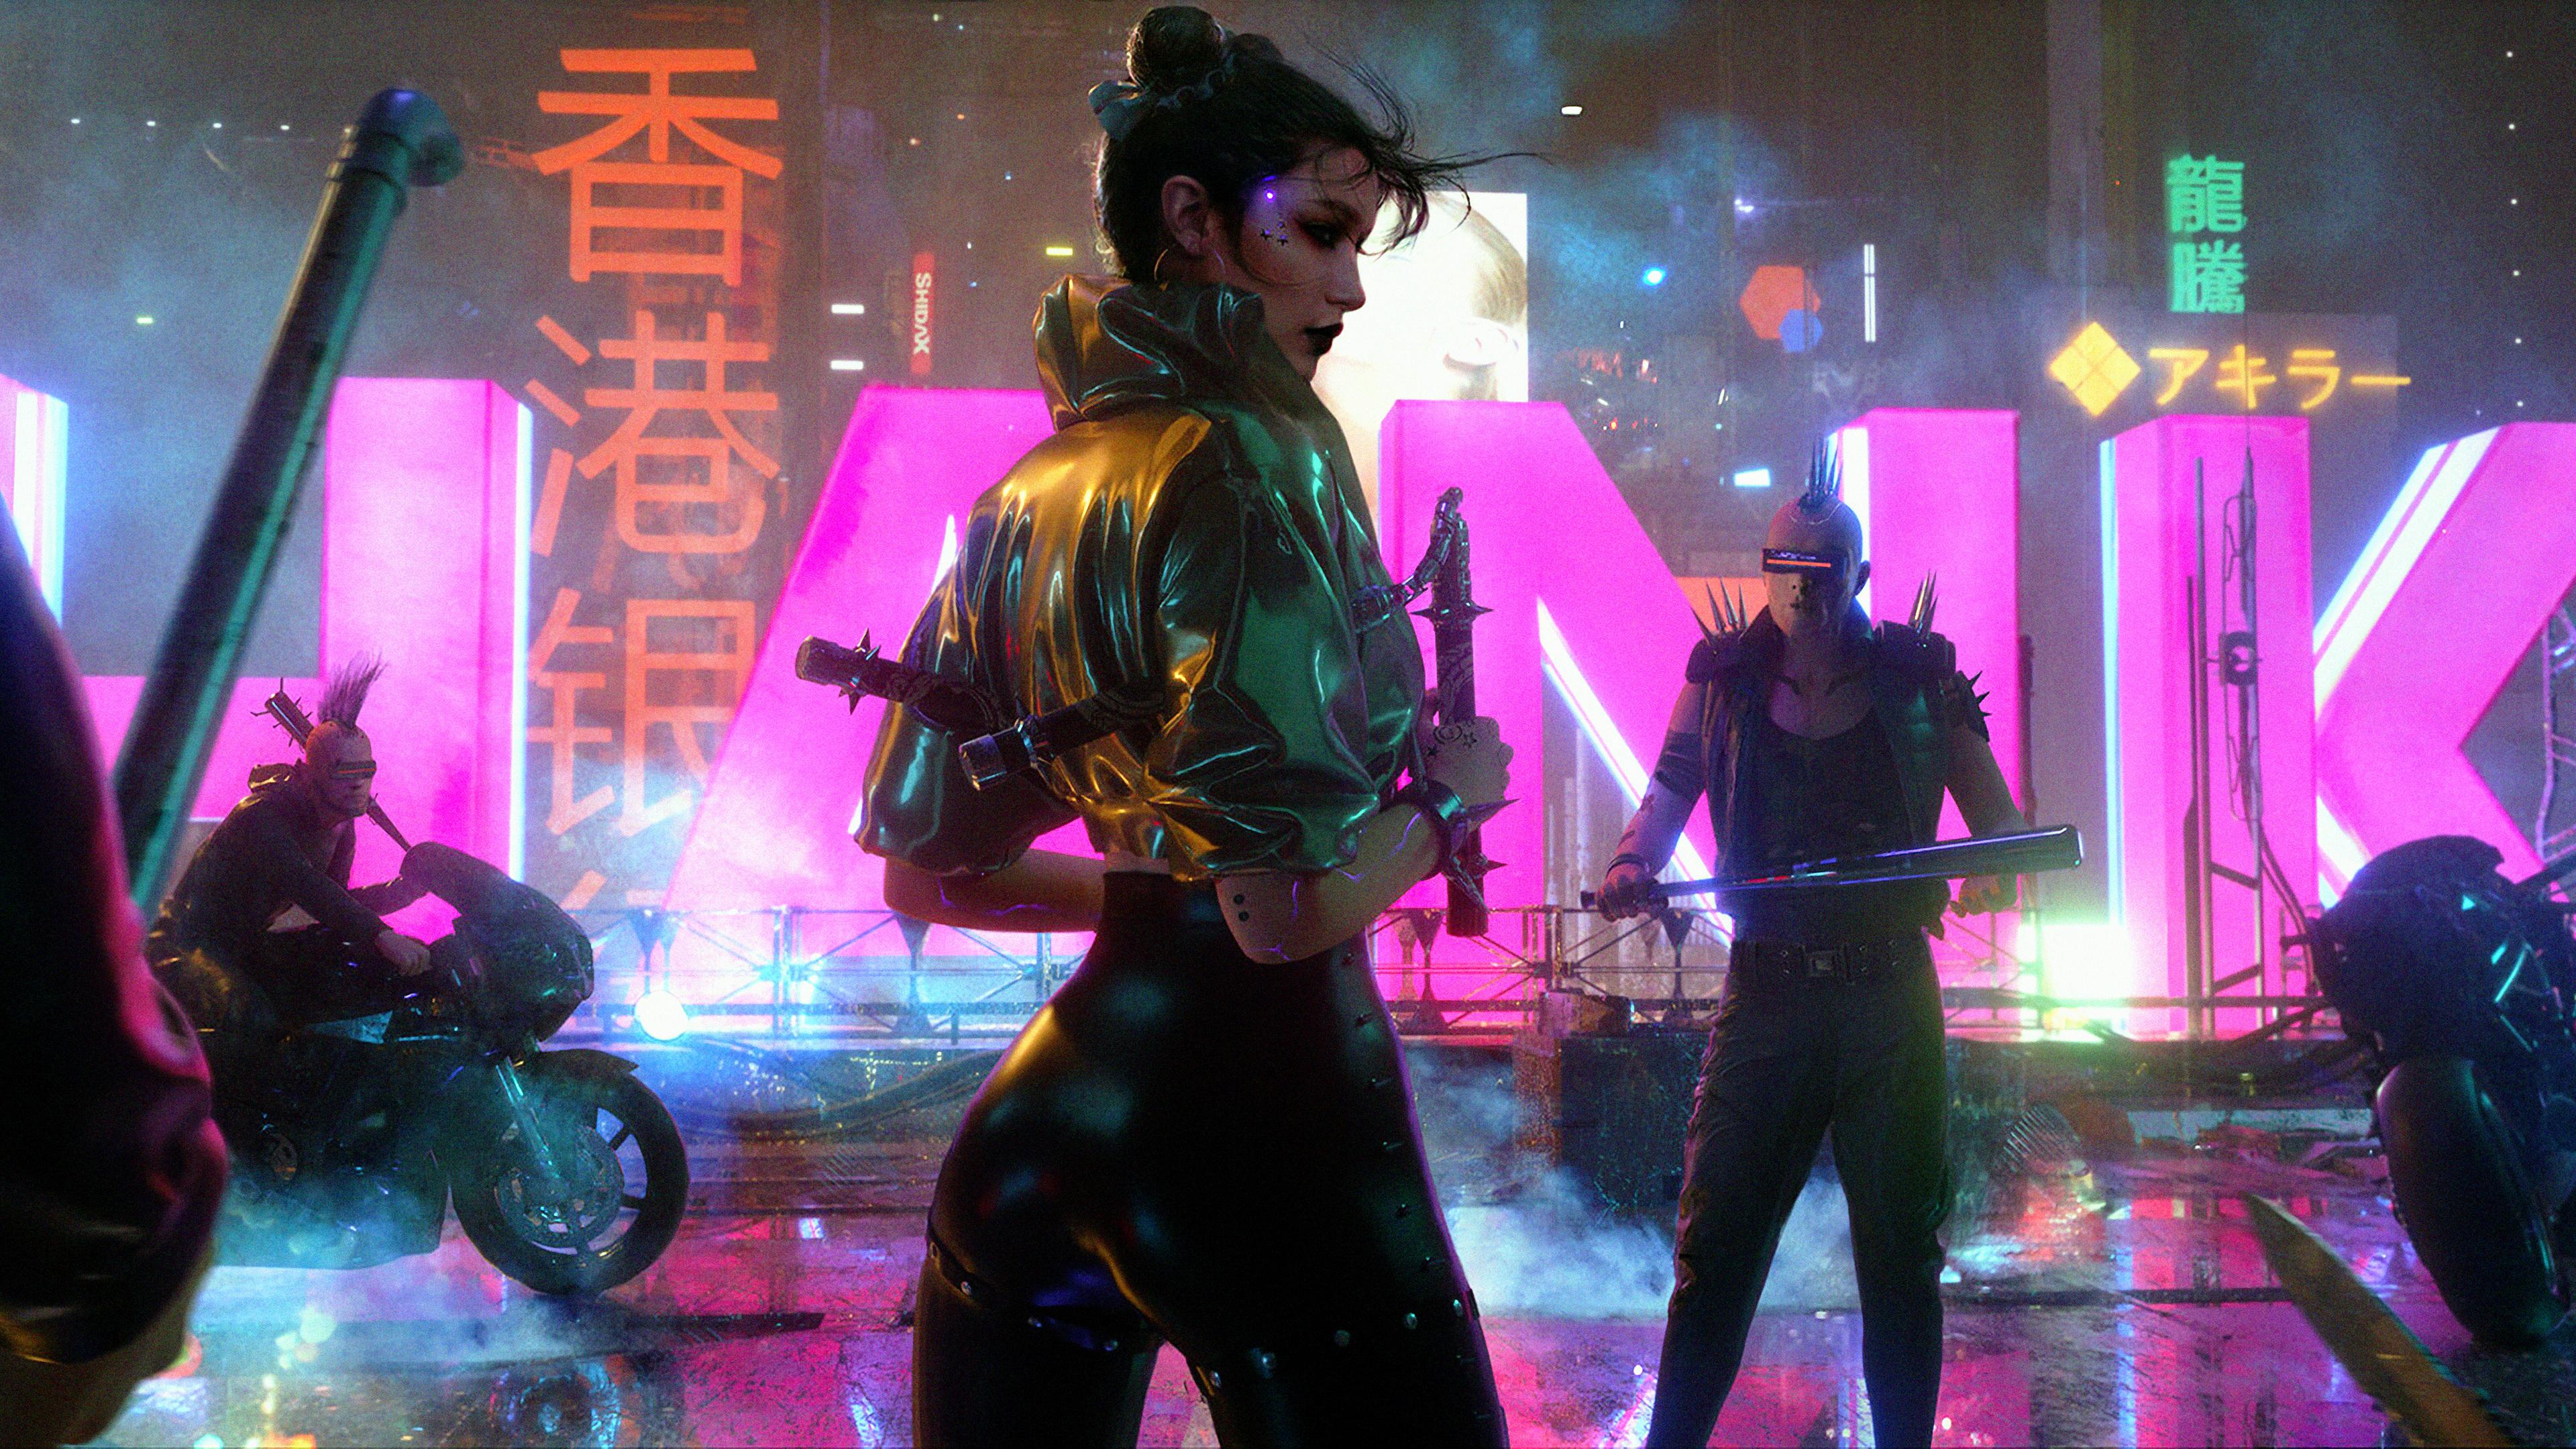 Cyberpunk 4K wallpapers for your desktop or mobile screen free and easy to download